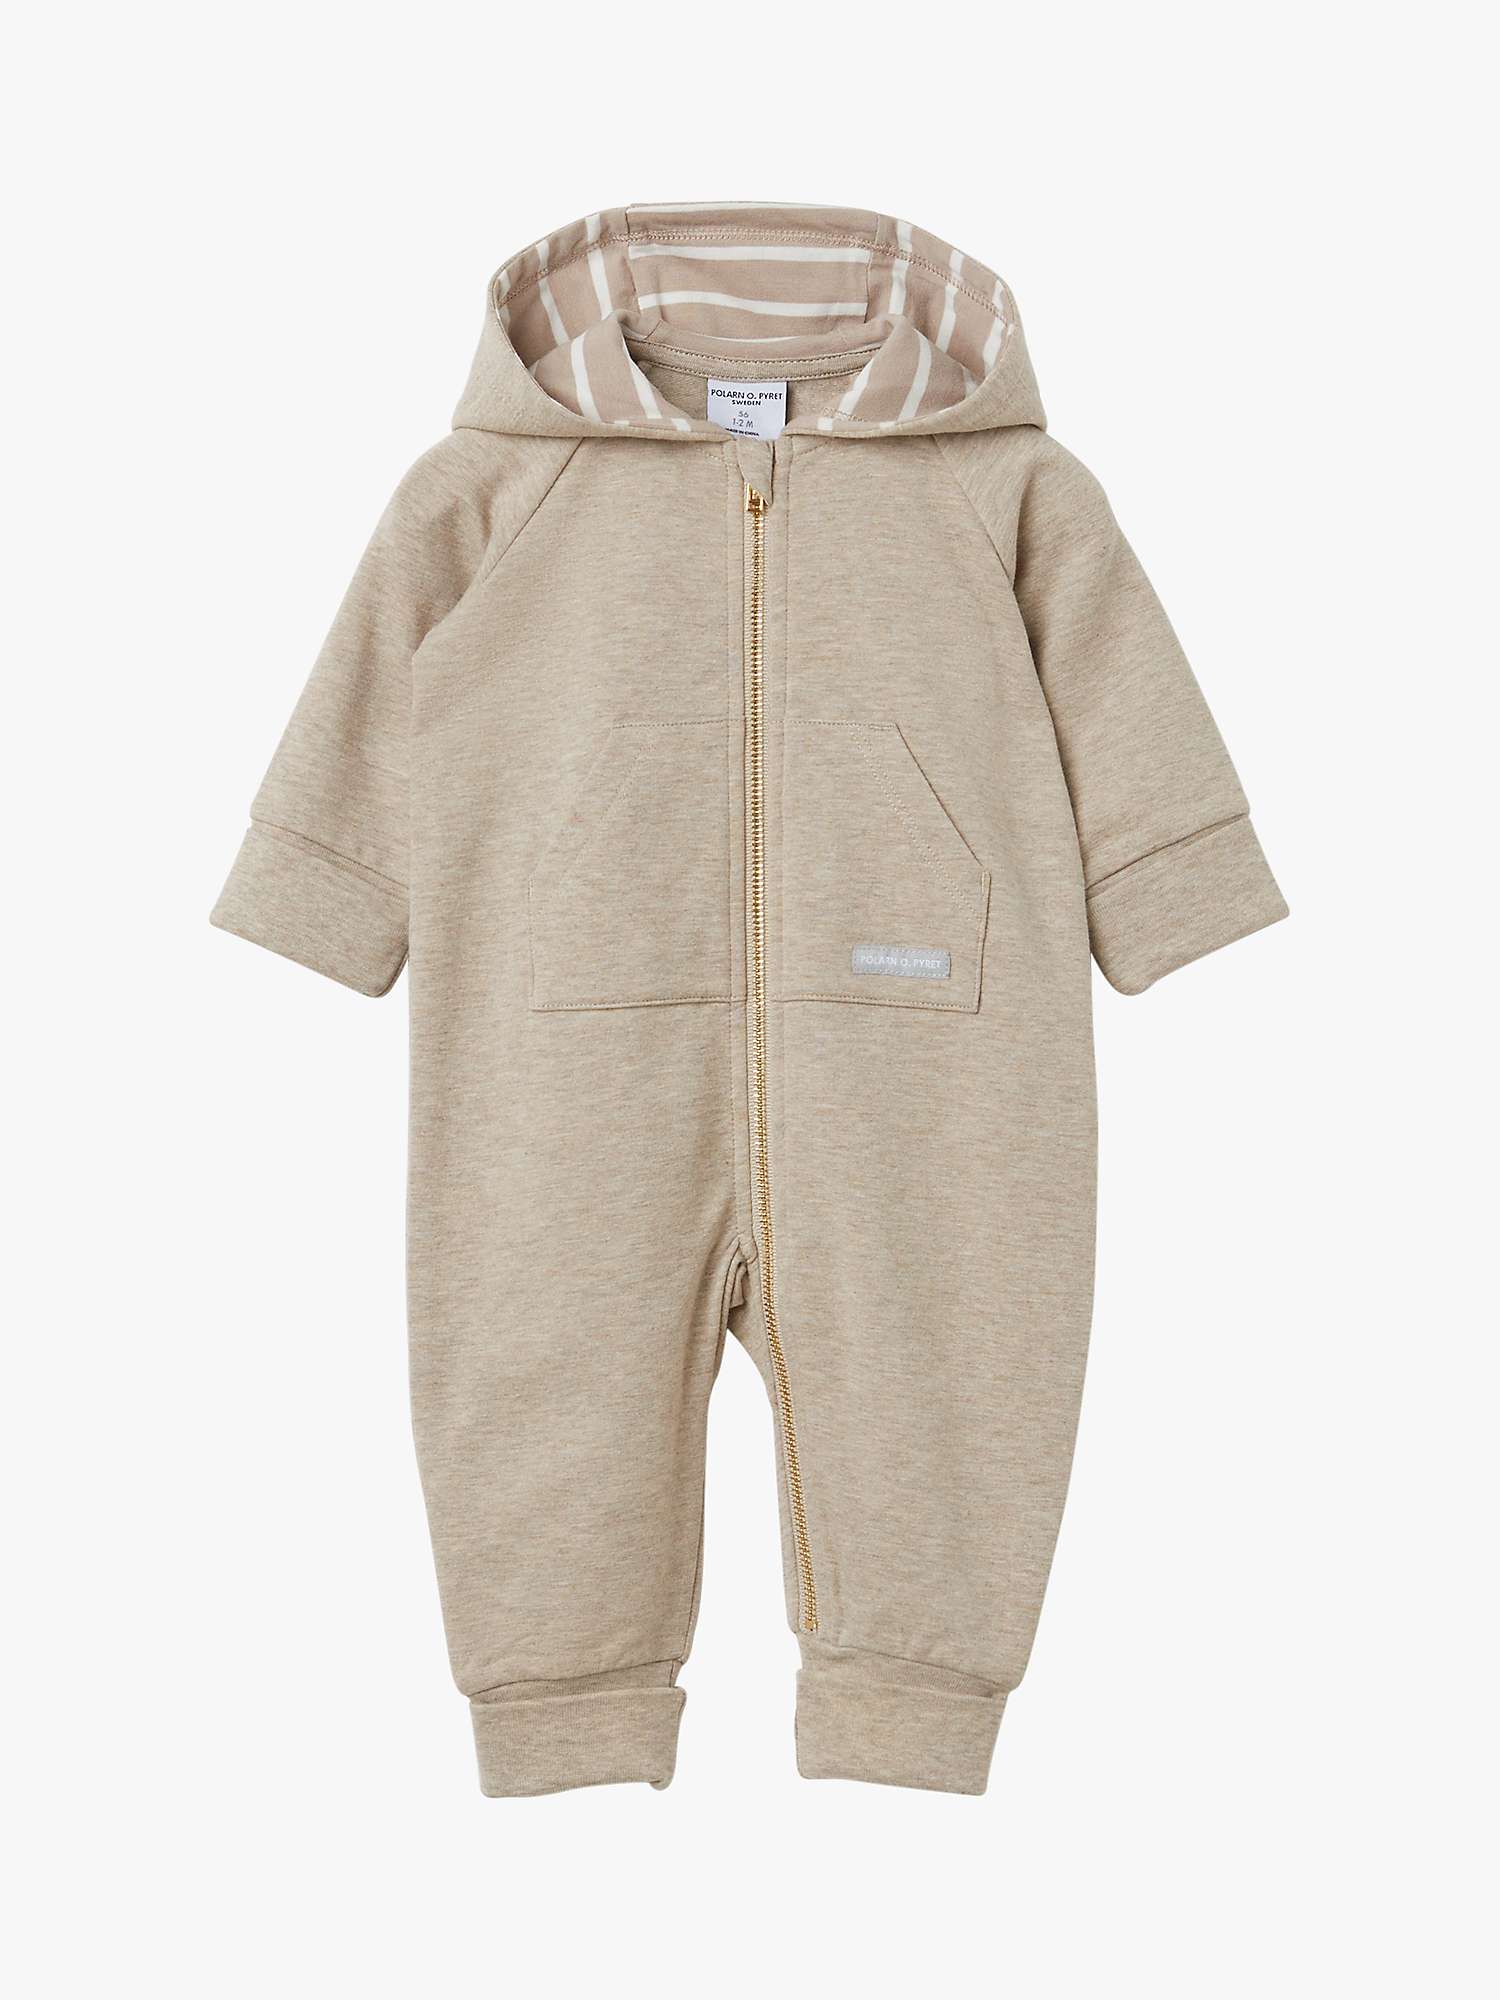 Buy Polarn O. Pyret Baby GOTS Organic Cotton Hooded Romper, Natural Online at johnlewis.com